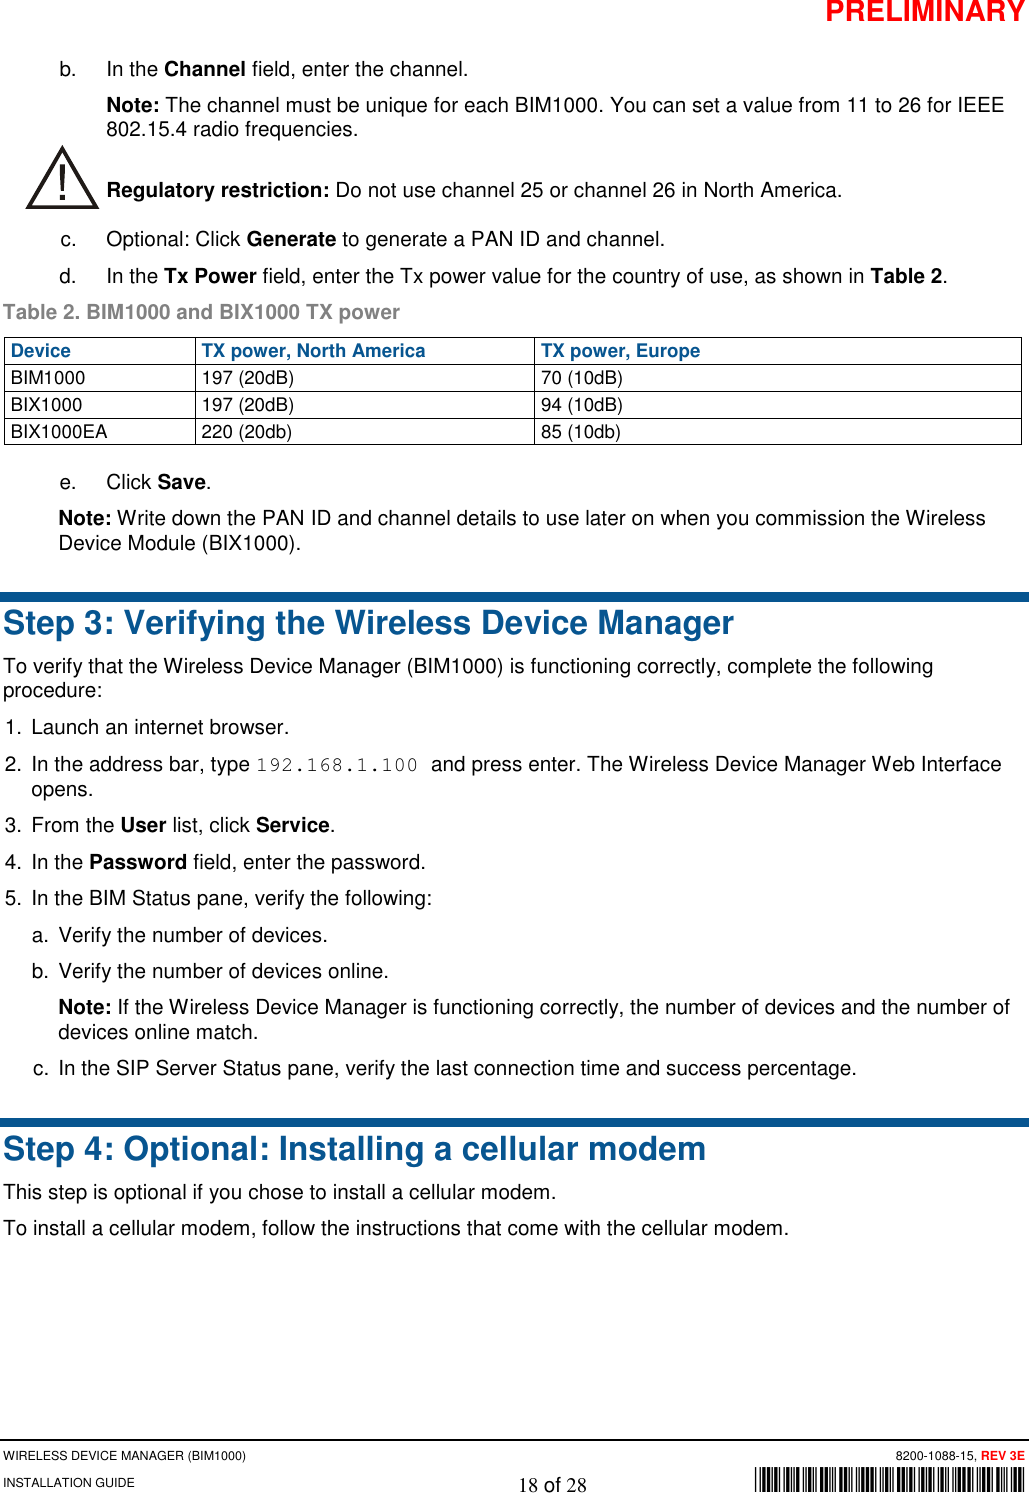 PRELIMINARY WIRELESS DEVICE MANAGER (BIM1000)      8200-1088-15, REV 3E INSTALLATION GUIDE    18 of 28        *8200-1088-15* b. In the Channel field, enter the channel.  Note: The channel must be unique for each BIM1000. You can set a value from 11 to 26 for IEEE 802.15.4 radio frequencies.  Regulatory restriction: Do not use channel 25 or channel 26 in North America. c. Optional: Click Generate to generate a PAN ID and channel.  d. In the Tx Power field, enter the Tx power value for the country of use, as shown in Table 2.  Table 2. BIM1000 and BIX1000 TX power Device TX power, North America TX power, Europe BIM1000 197 (20dB) 70 (10dB) BIX1000 197 (20dB) 94 (10dB) BIX1000EA 220 (20db) 85 (10db) e. Click Save. Note: Write down the PAN ID and channel details to use later on when you commission the Wireless Device Module (BIX1000).  Step 3: Verifying the Wireless Device Manager  To verify that the Wireless Device Manager (BIM1000) is functioning correctly, complete the following procedure: 1. Launch an internet browser. 2. In the address bar, type 192.168.1.100 and press enter. The Wireless Device Manager Web Interface opens.  3. From the User list, click Service. 4. In the Password field, enter the password.  5. In the BIM Status pane, verify the following: a. Verify the number of devices. b. Verify the number of devices online.  Note: If the Wireless Device Manager is functioning correctly, the number of devices and the number of devices online match. c. In the SIP Server Status pane, verify the last connection time and success percentage. Step 4: Optional: Installing a cellular modem This step is optional if you chose to install a cellular modem. To install a cellular modem, follow the instructions that come with the cellular modem.    